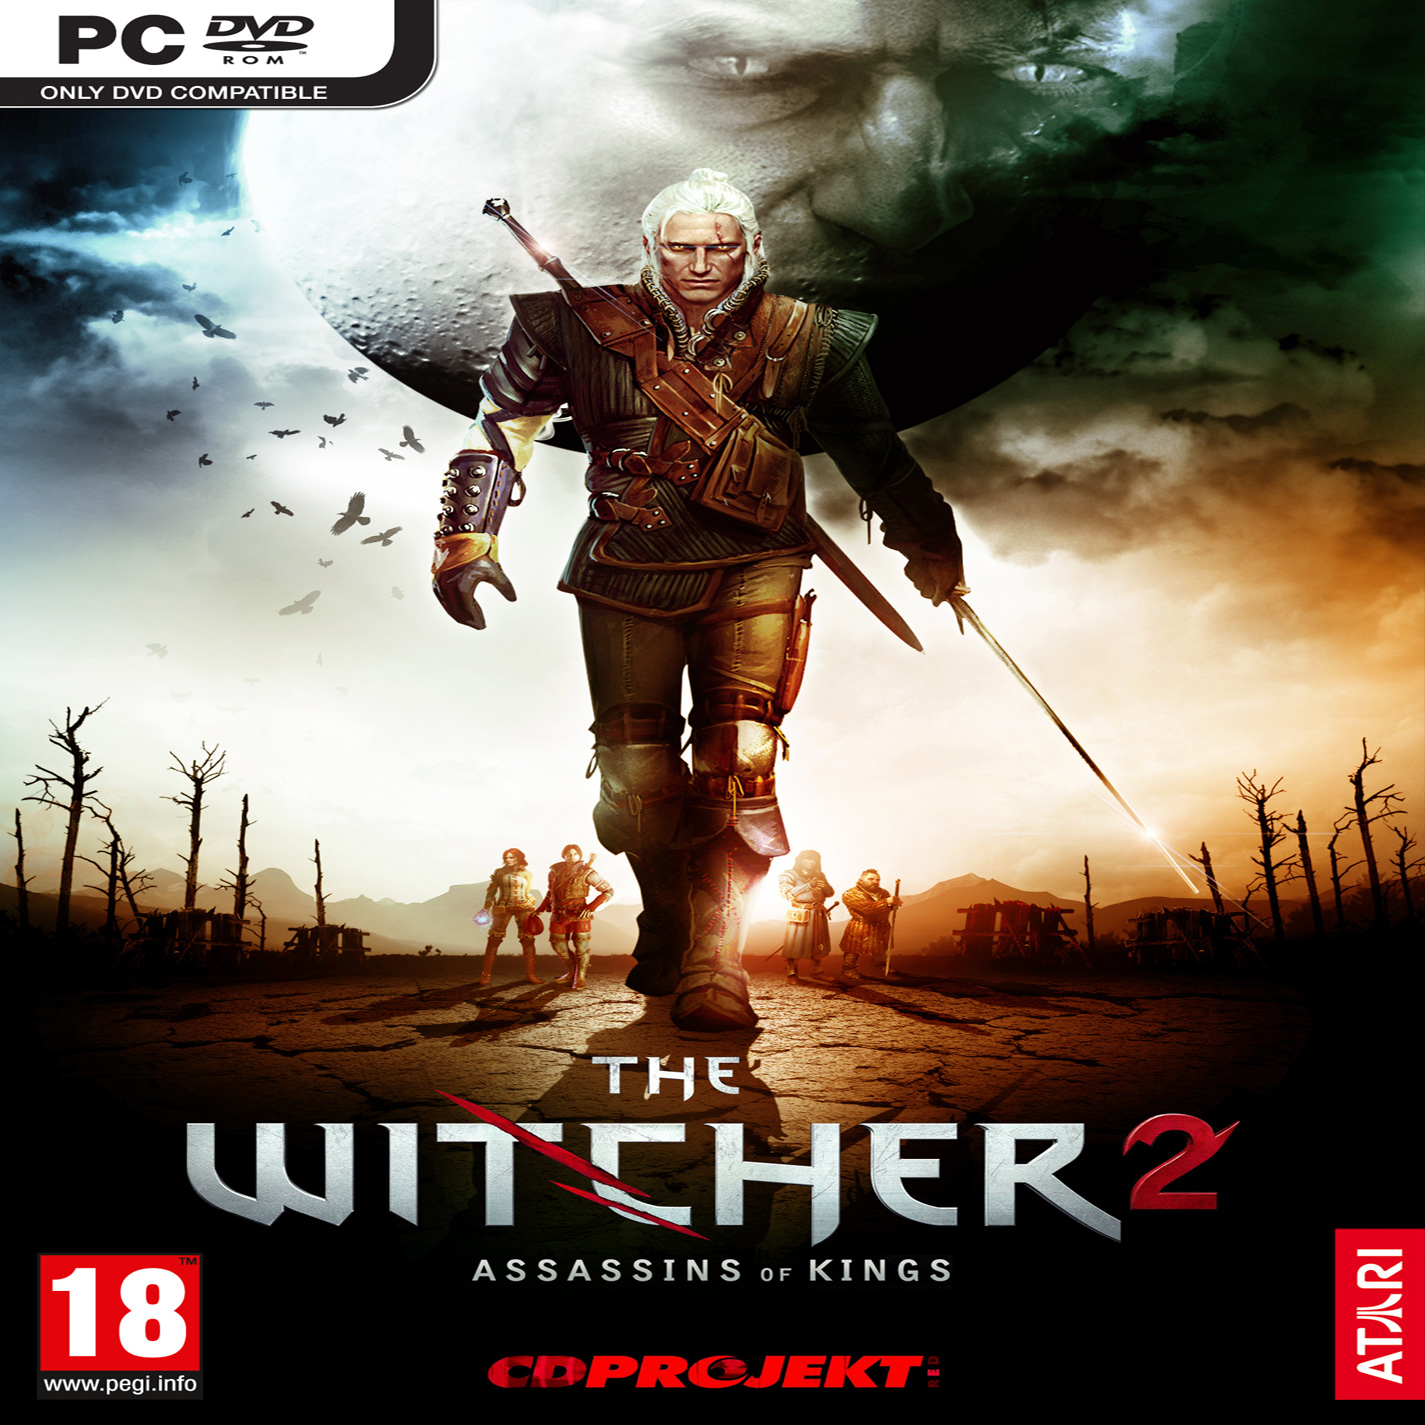 The Witcher 2: Assassins of Kings - predn CD obal 3